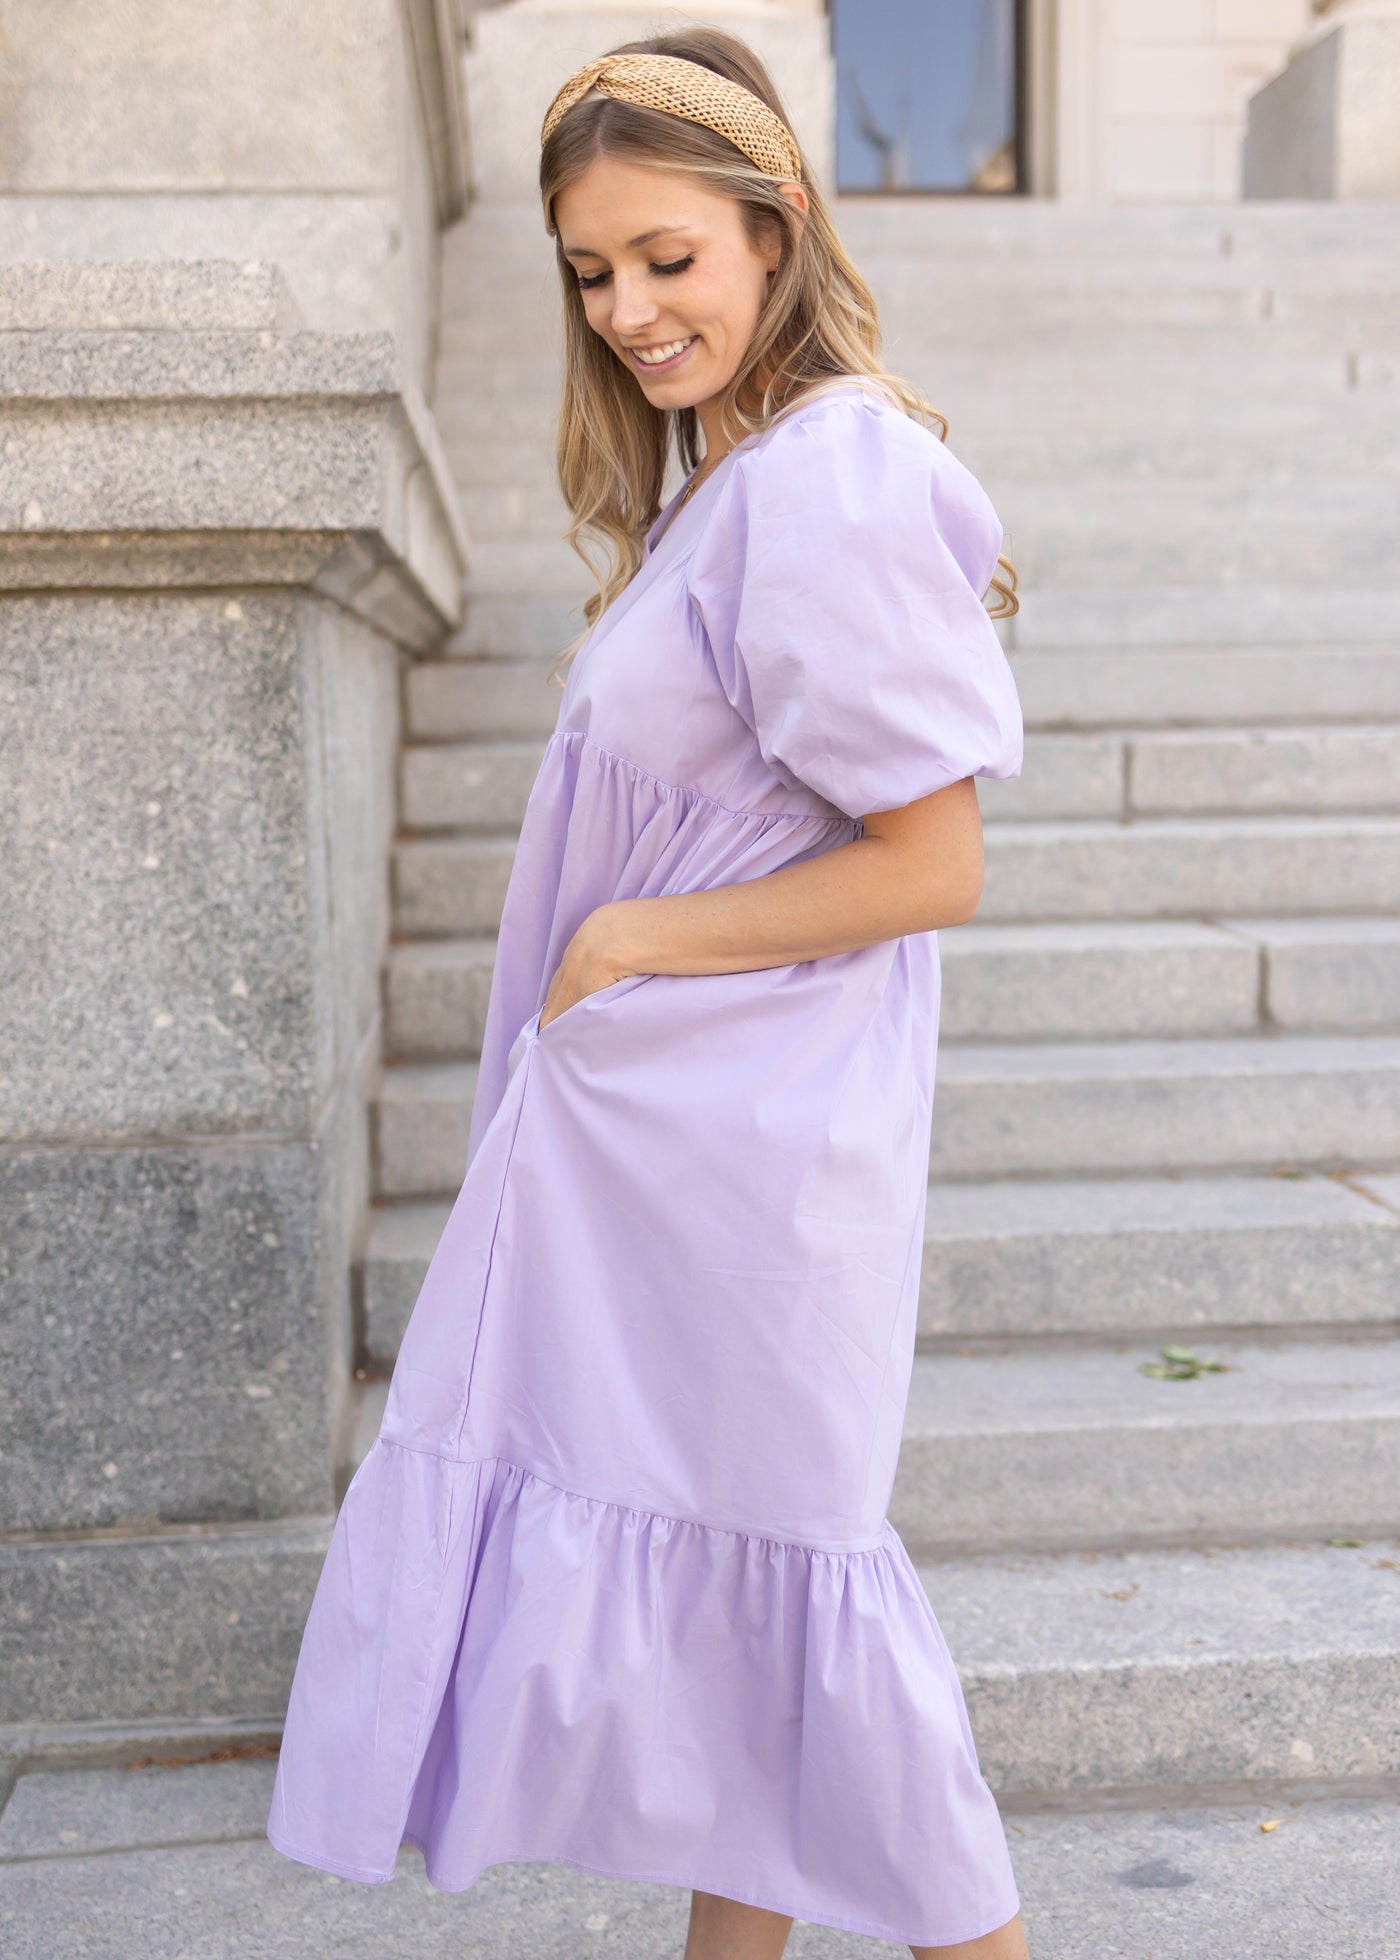 Side view of a short sleeve lavender dress